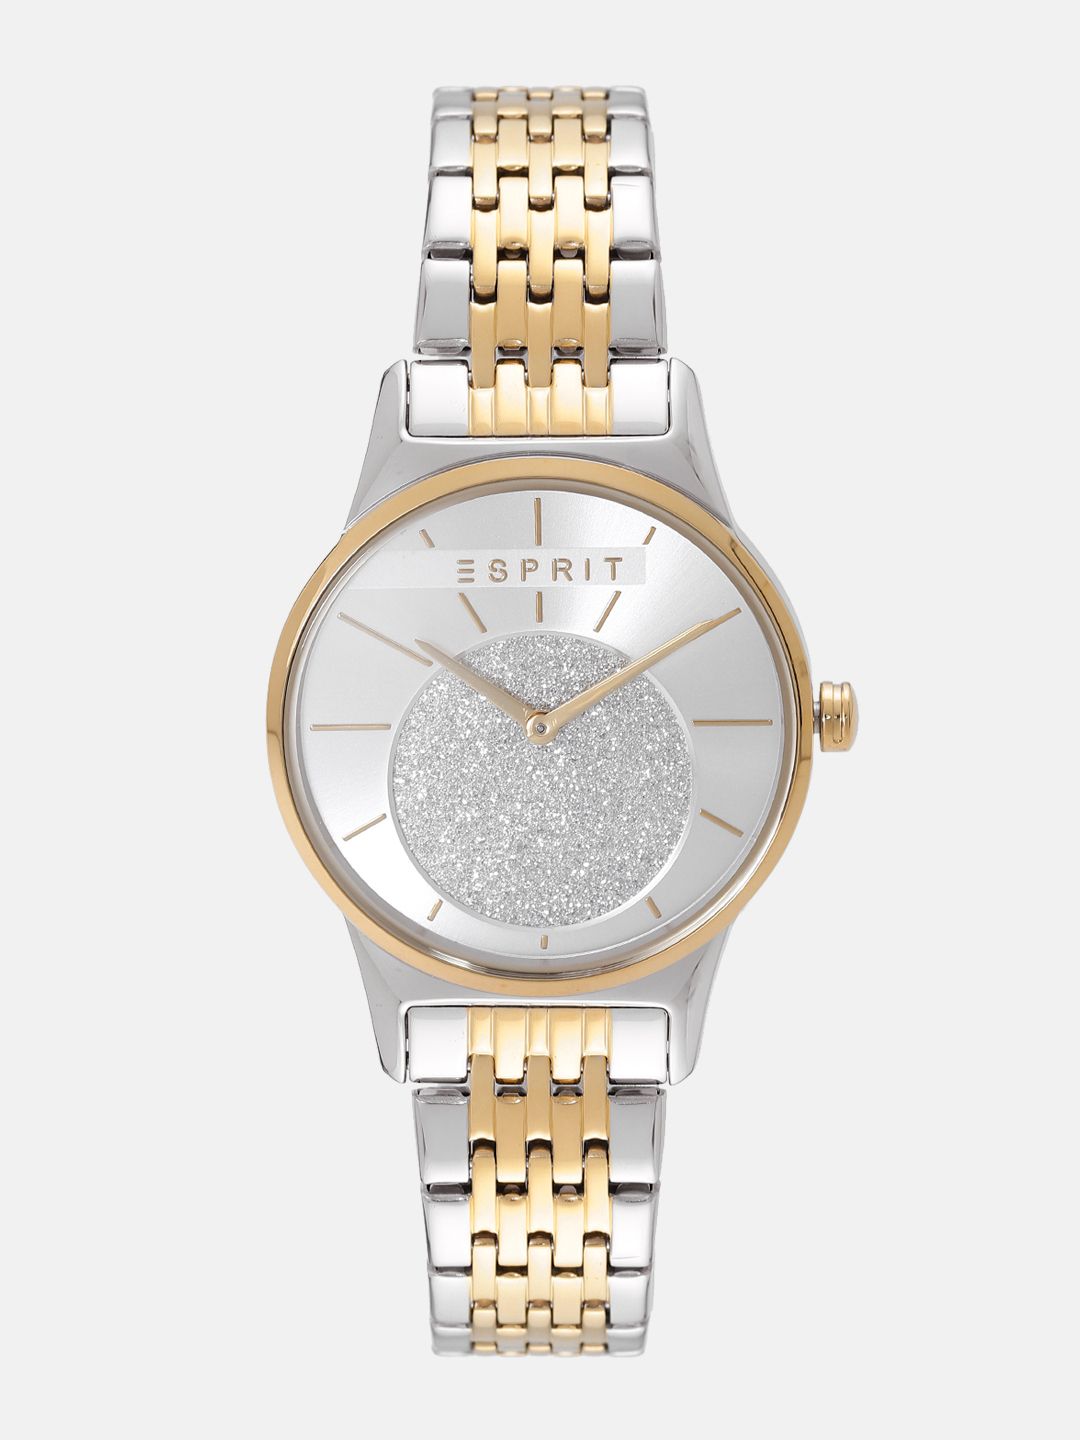 ESPRIT Women Silver-Toned Analogue Watch ES1L026M0065 Price in India